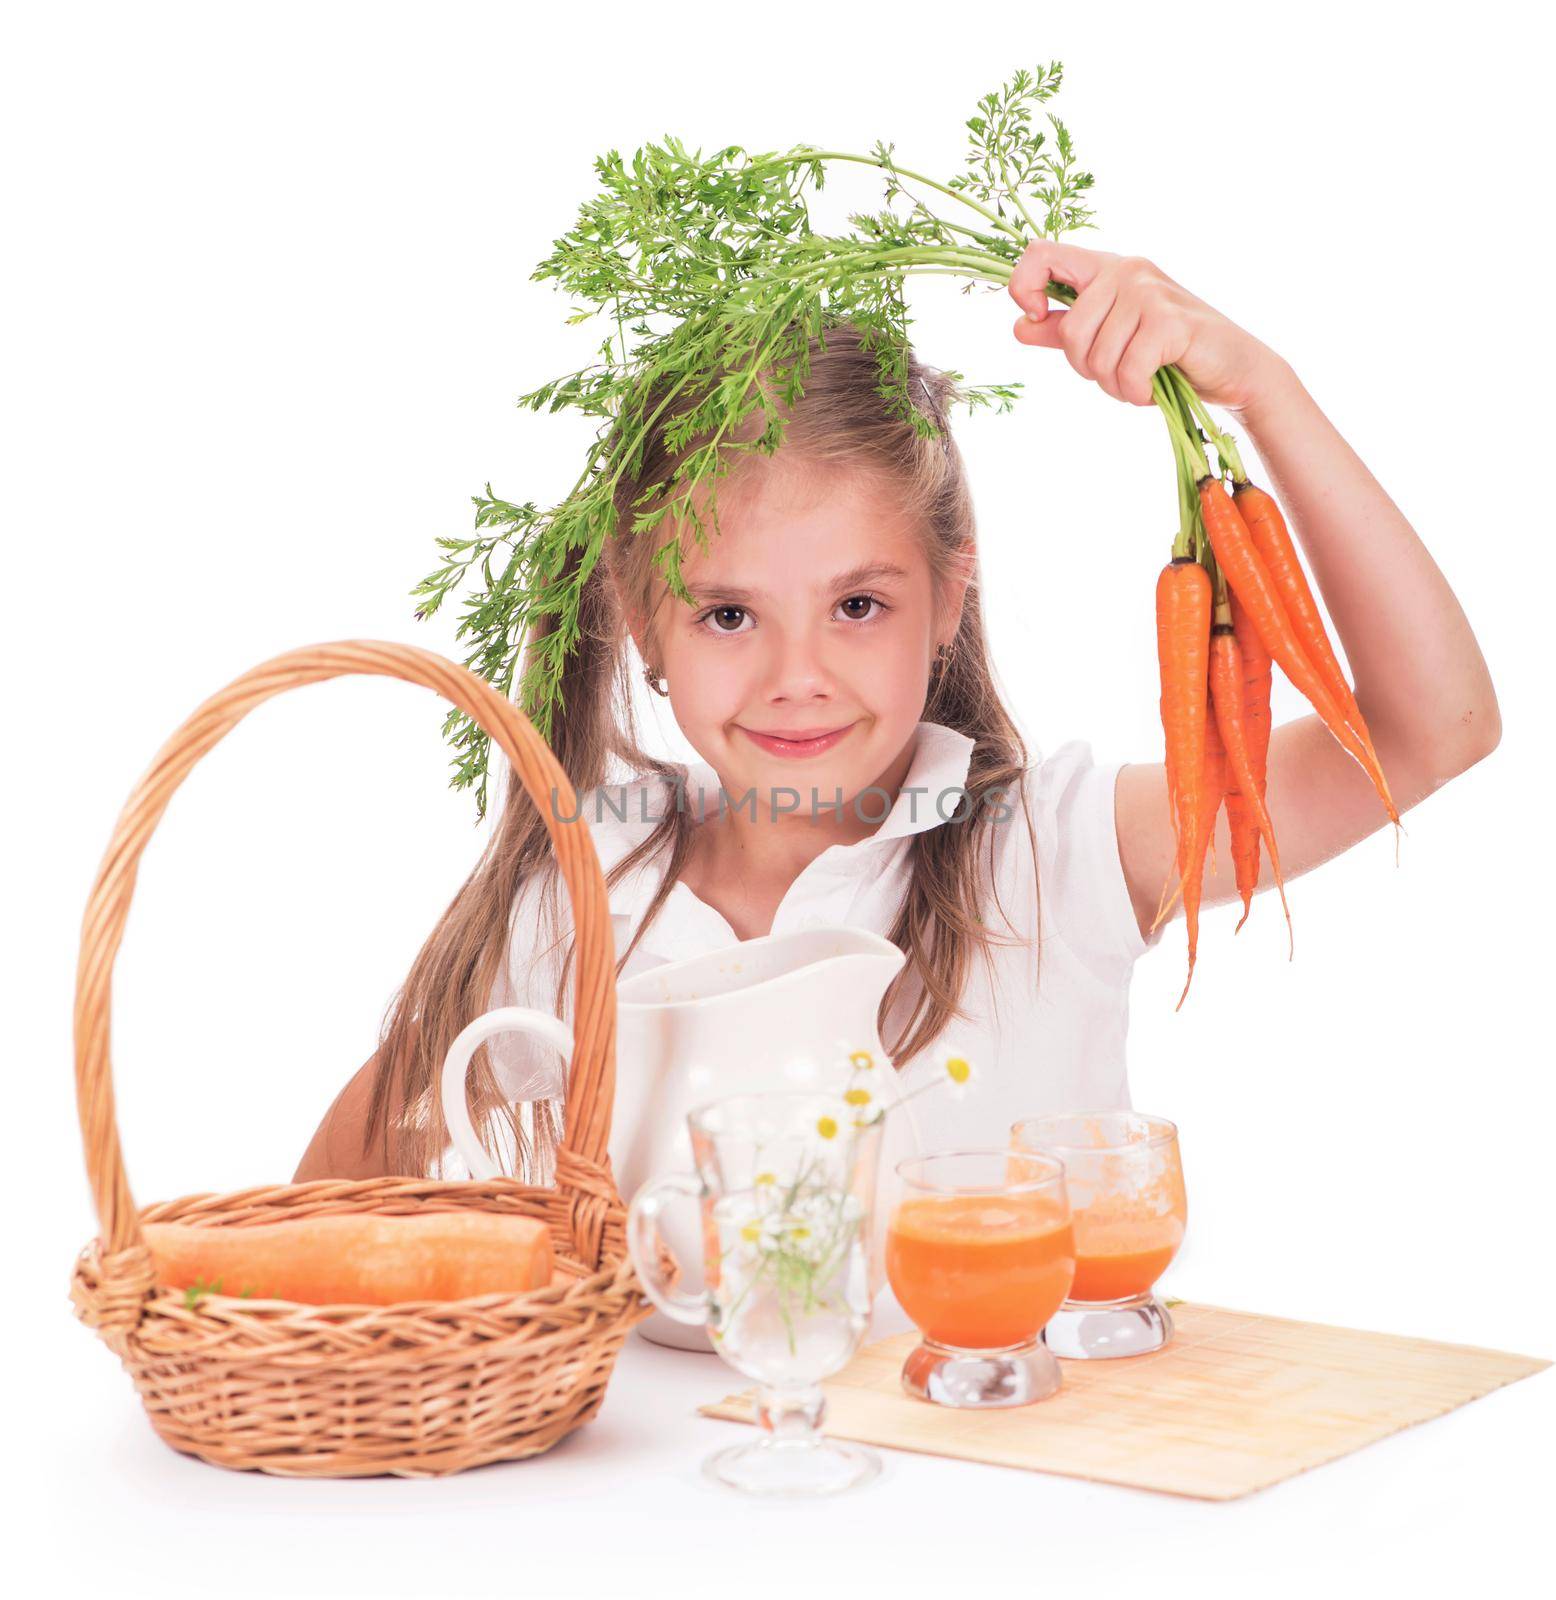 Girl and carrot juice isolated on white background by aprilphoto